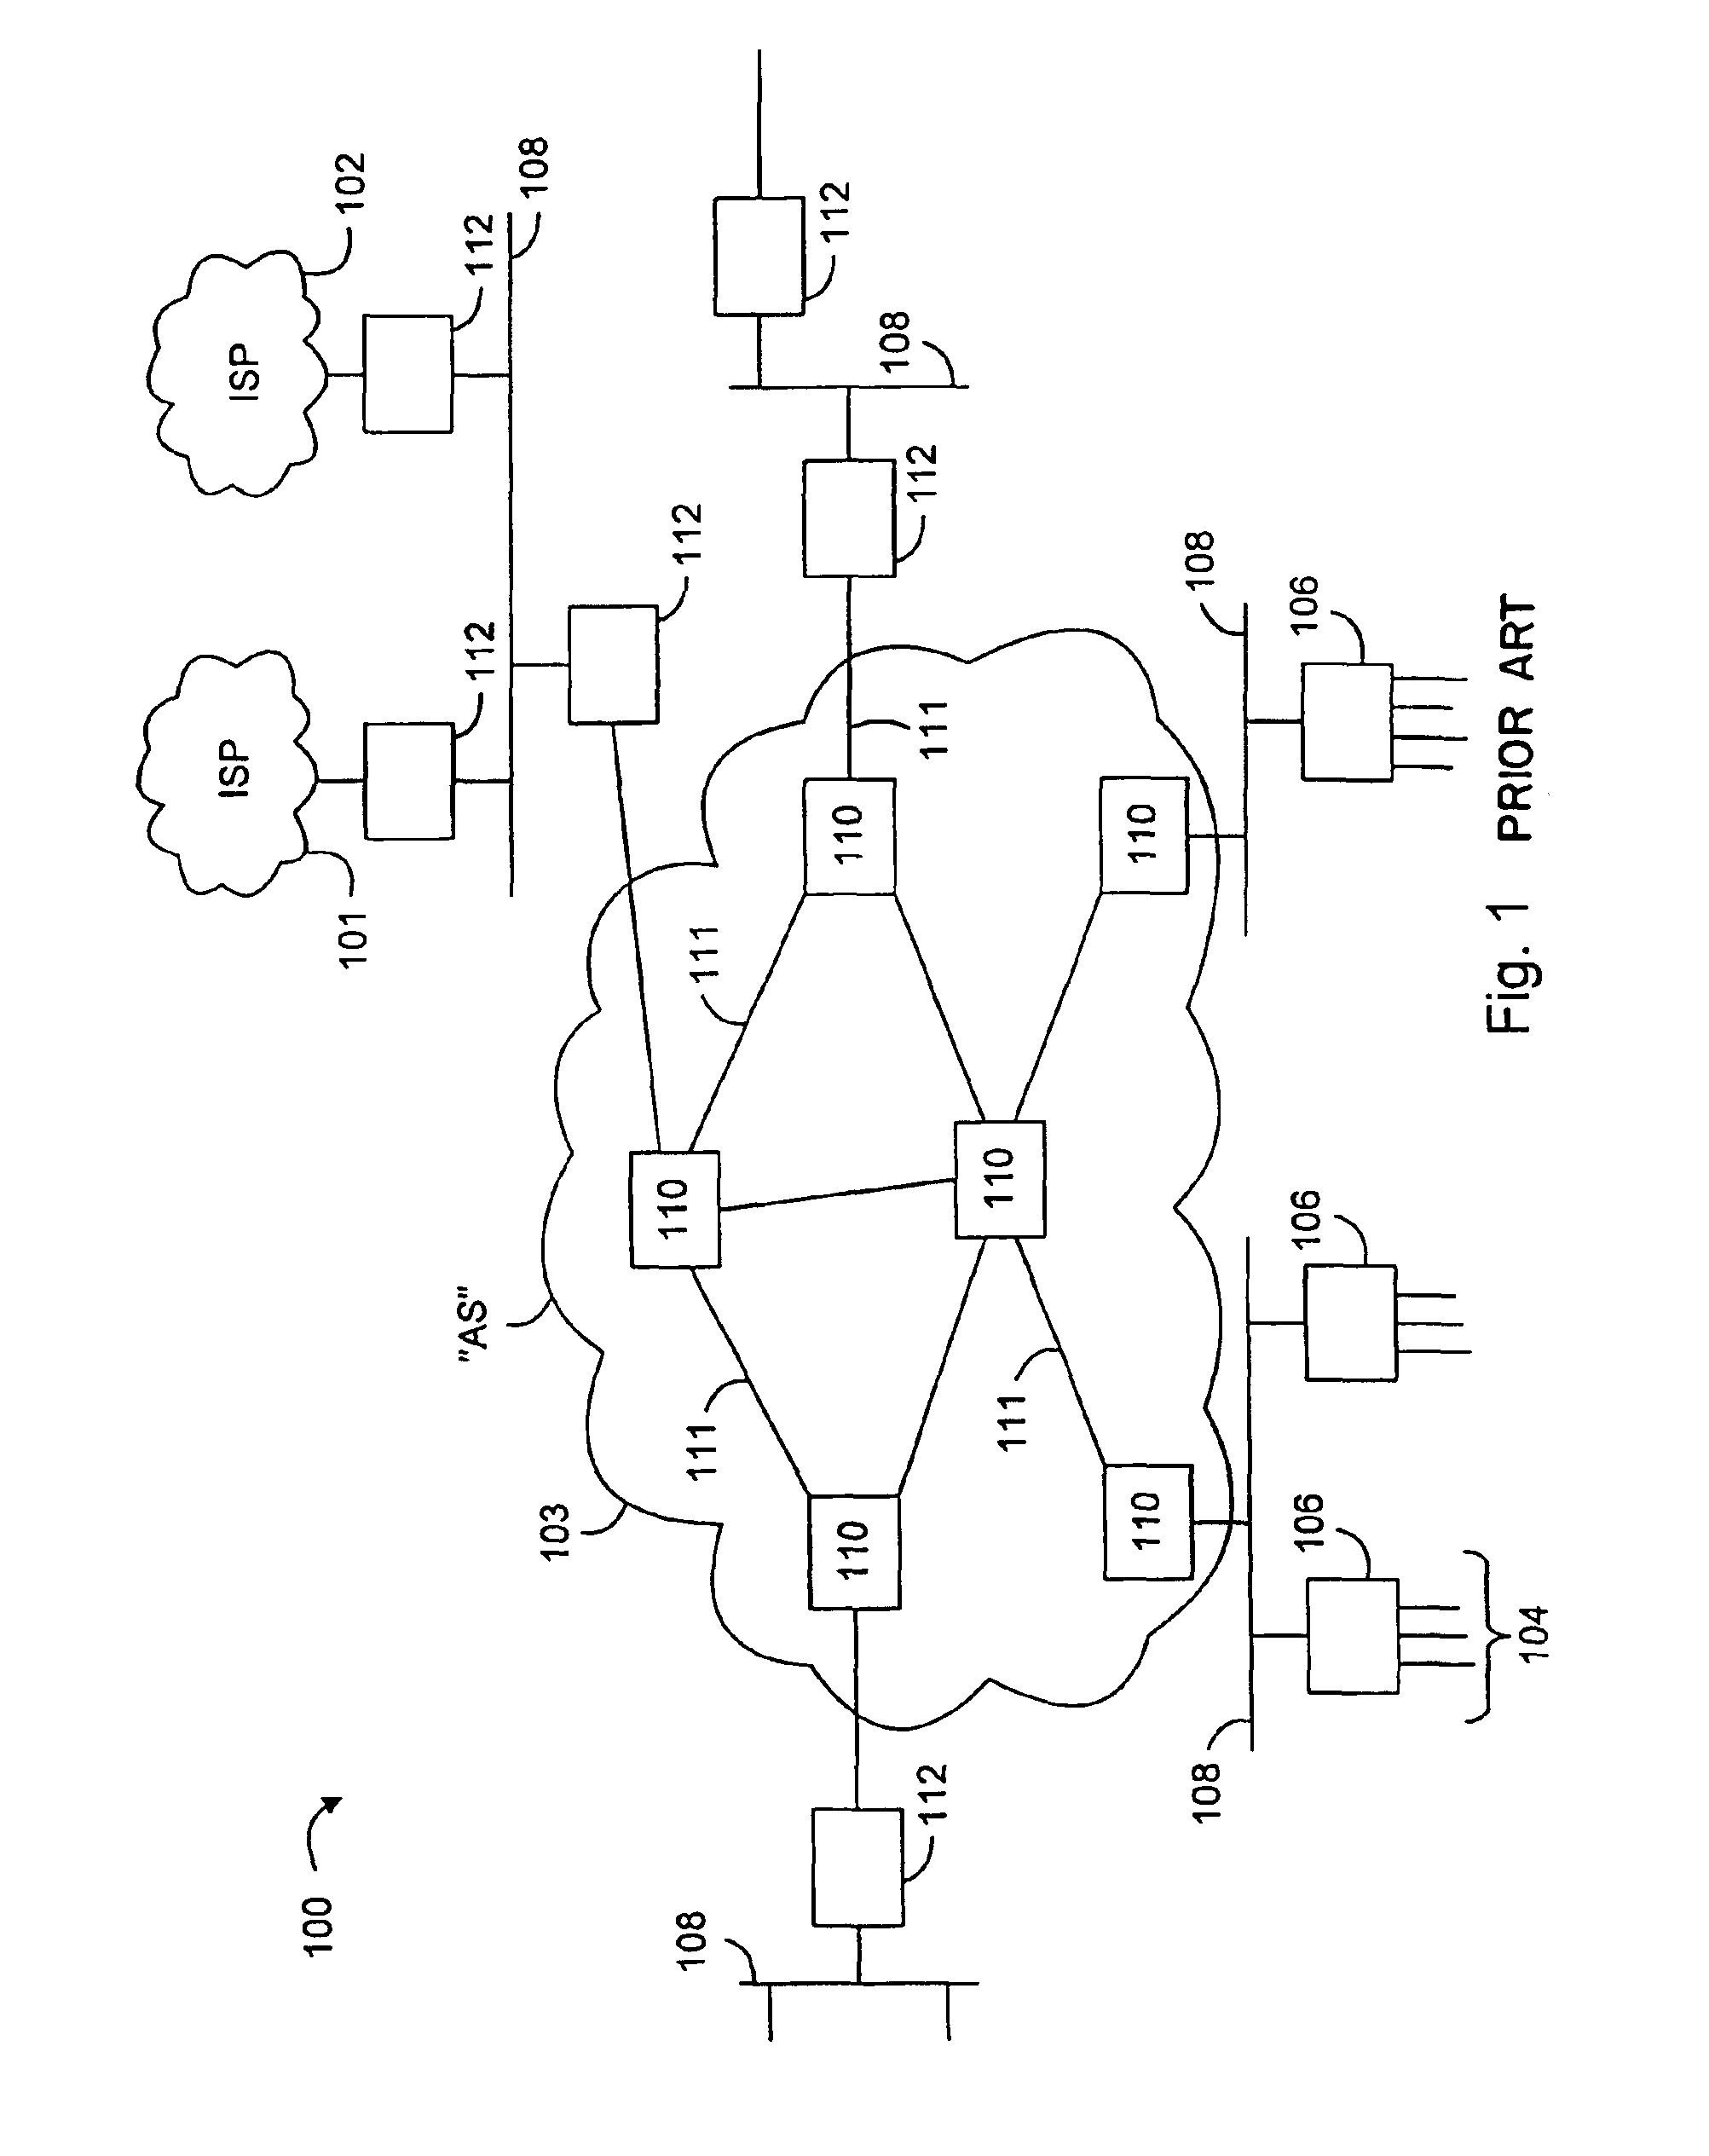 Proximity-based redirection system for robust and scalable service-node location in an internetwork